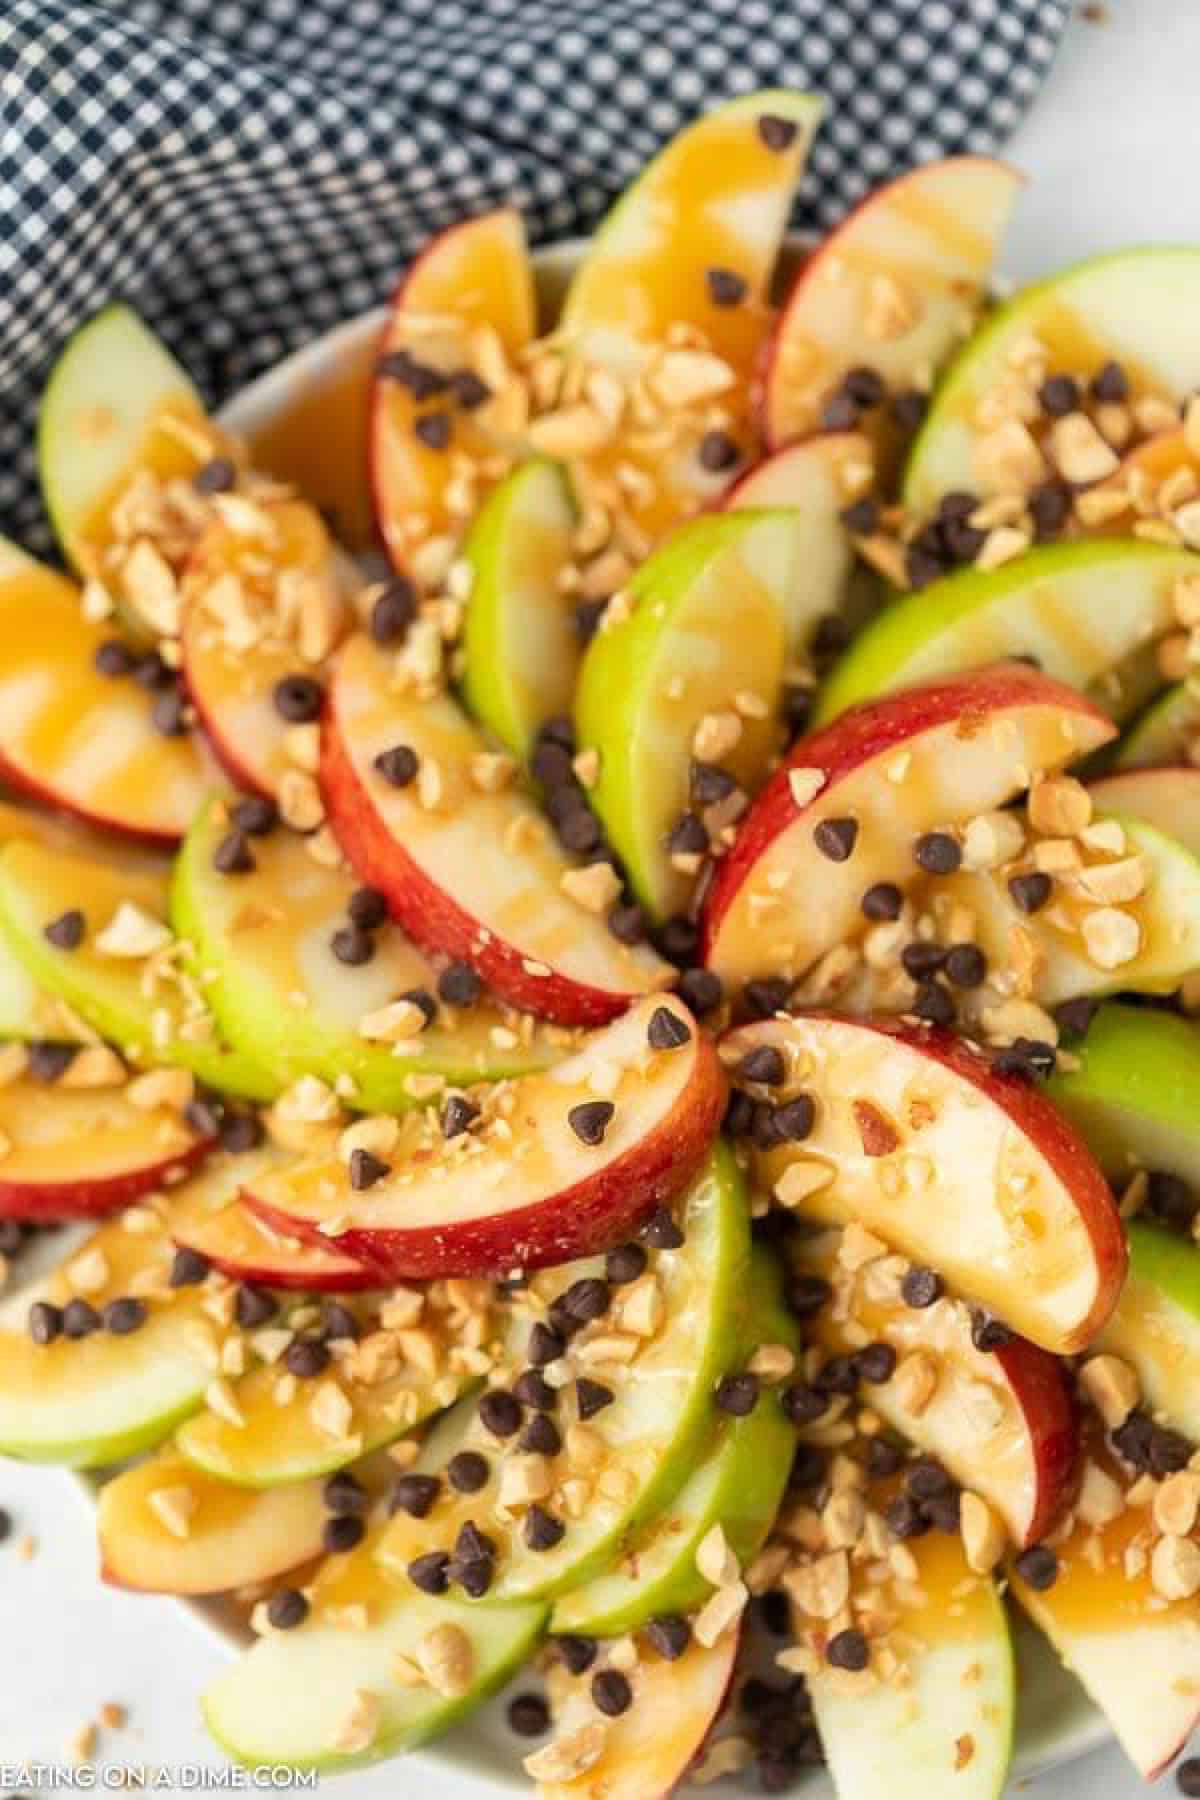 Try easy caramel apple nachos recipe for a treat. Layers of crispy apples topped with decadent caramel sauce come together for a tasty snack. 